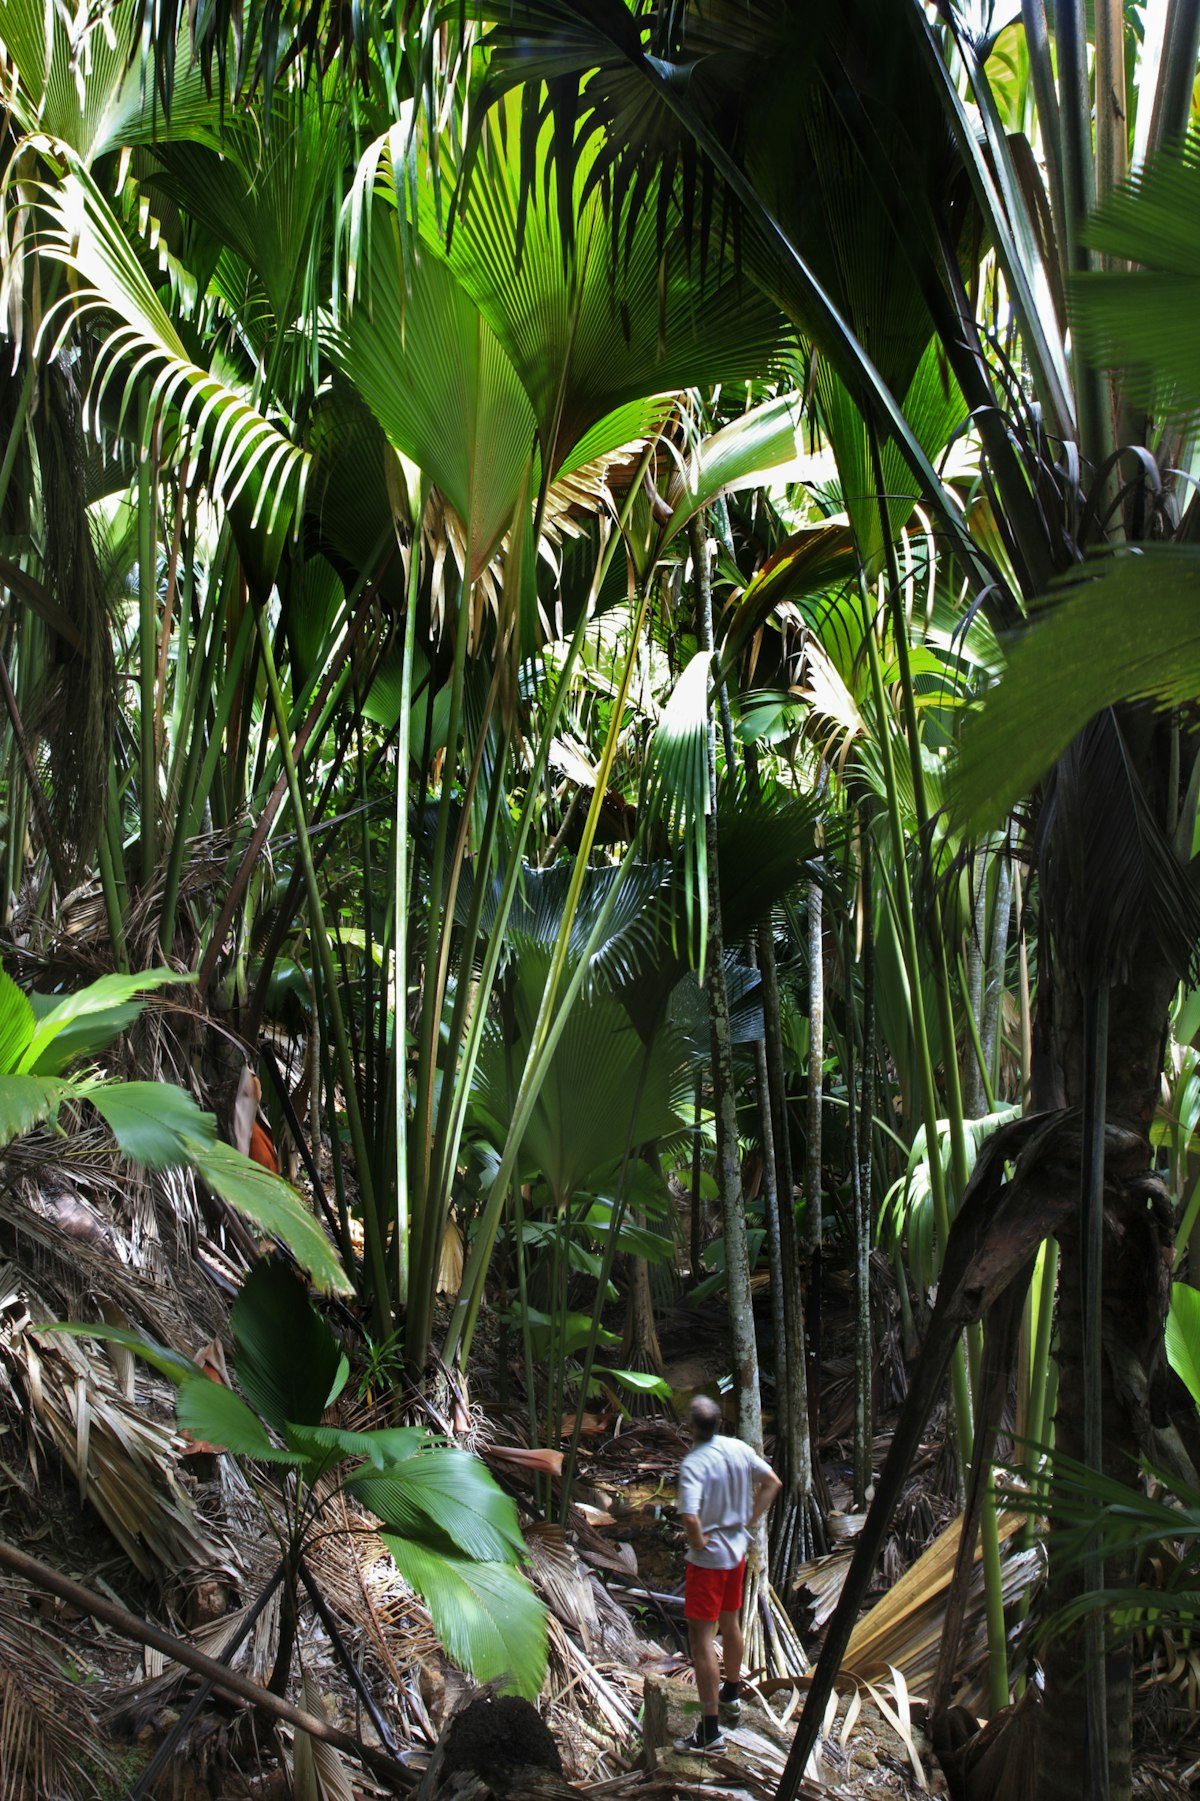 Man looking at young coco de mer palm in forest of World Heritage site Vallee de Mai in Praslin National Park.